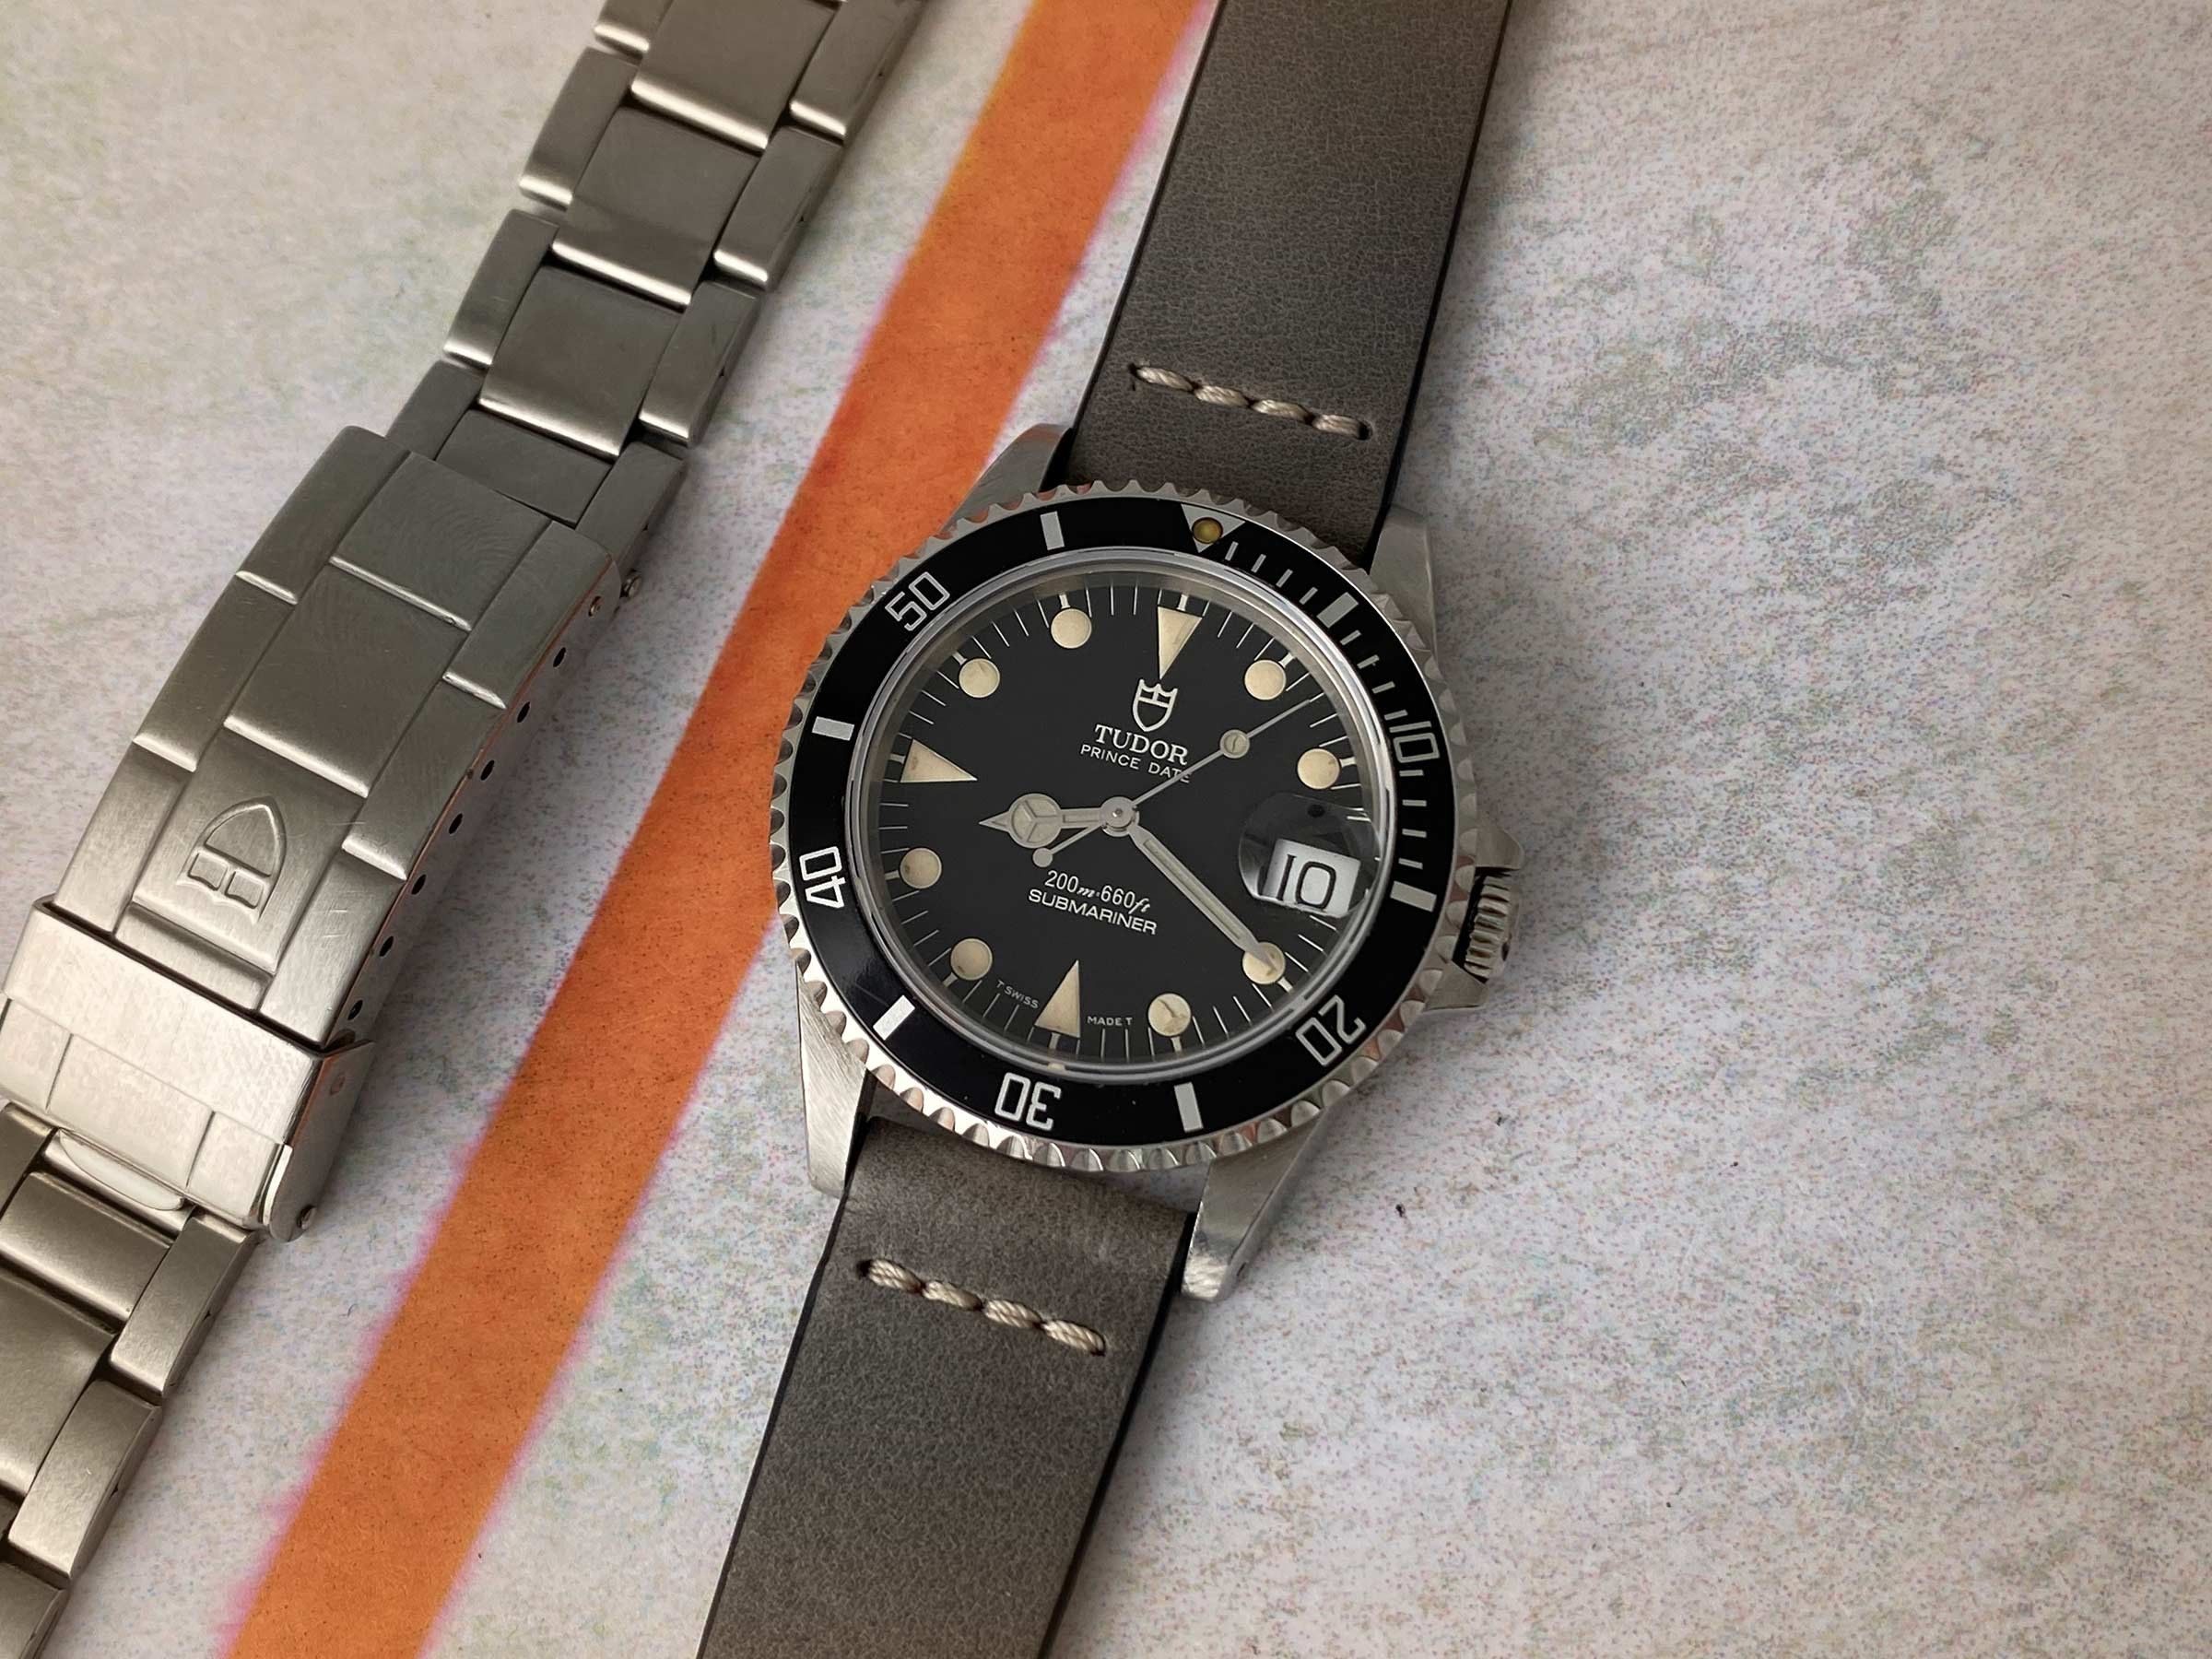 TUDOR PRINCE DATE SUBMARINER 200m 660ft swiss automatic watch Ref ...